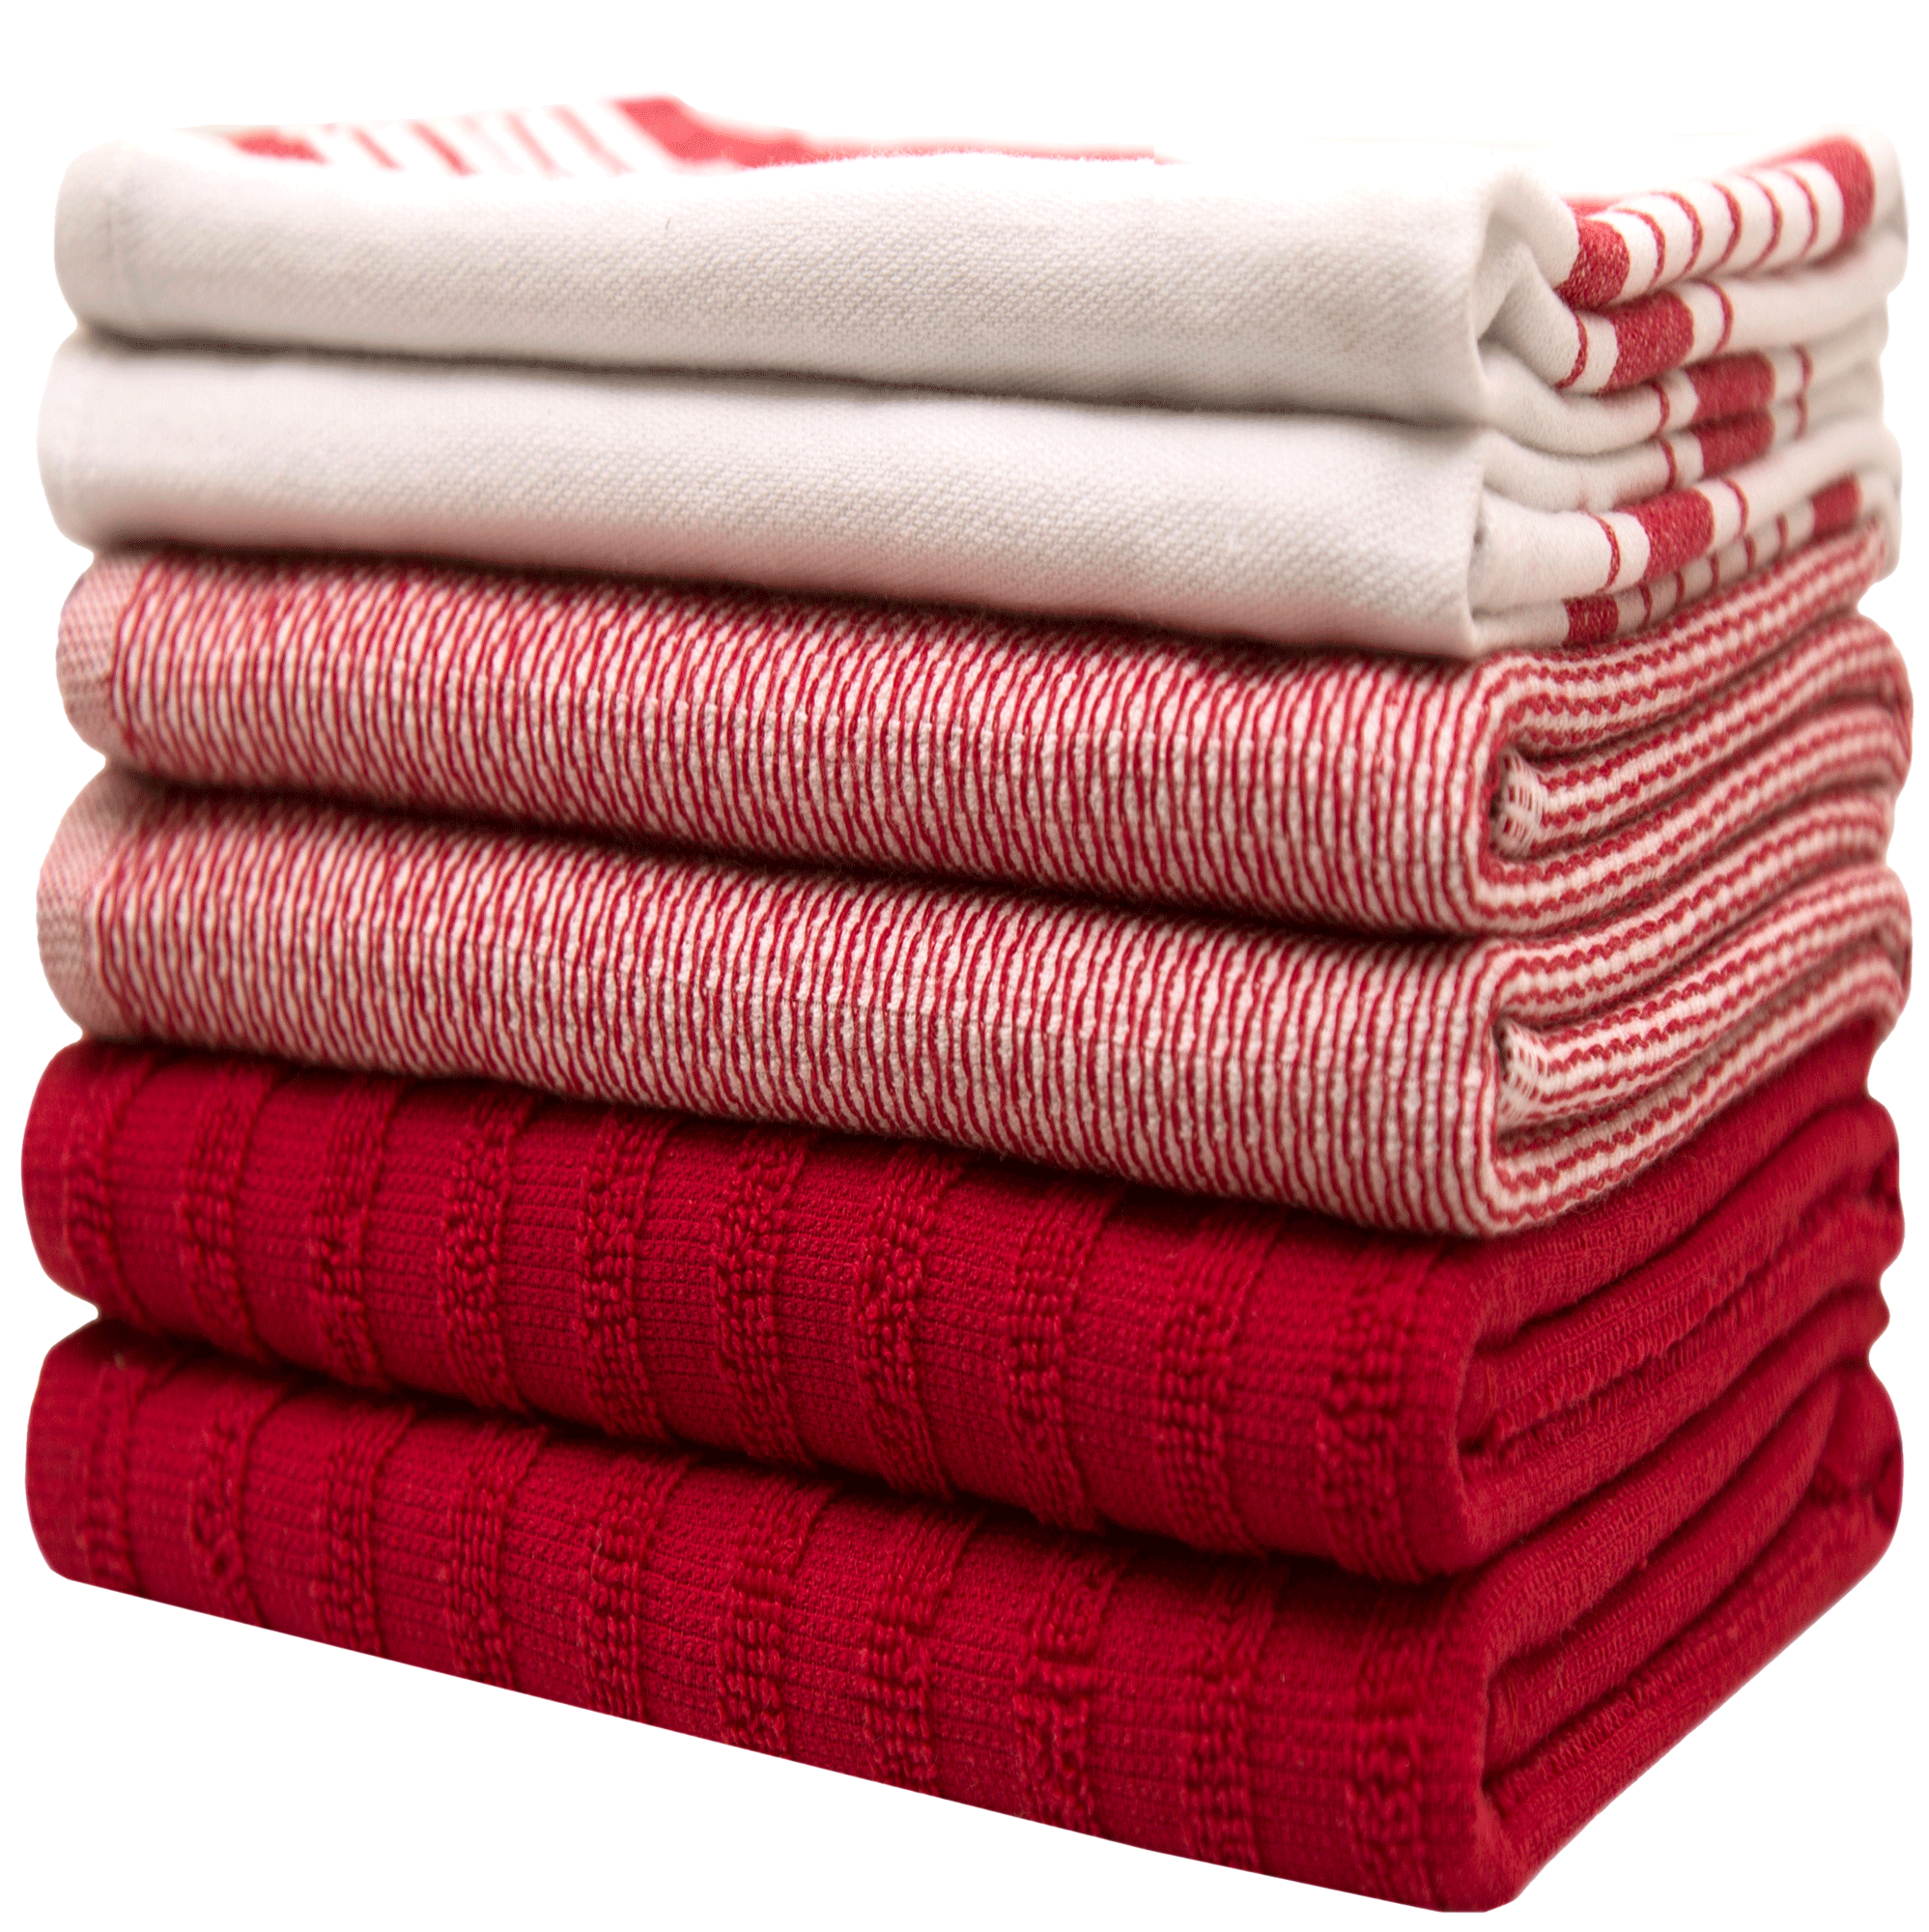 Super Absorbent Microfiber Kitchen Towels - Extra-wide Stripe And